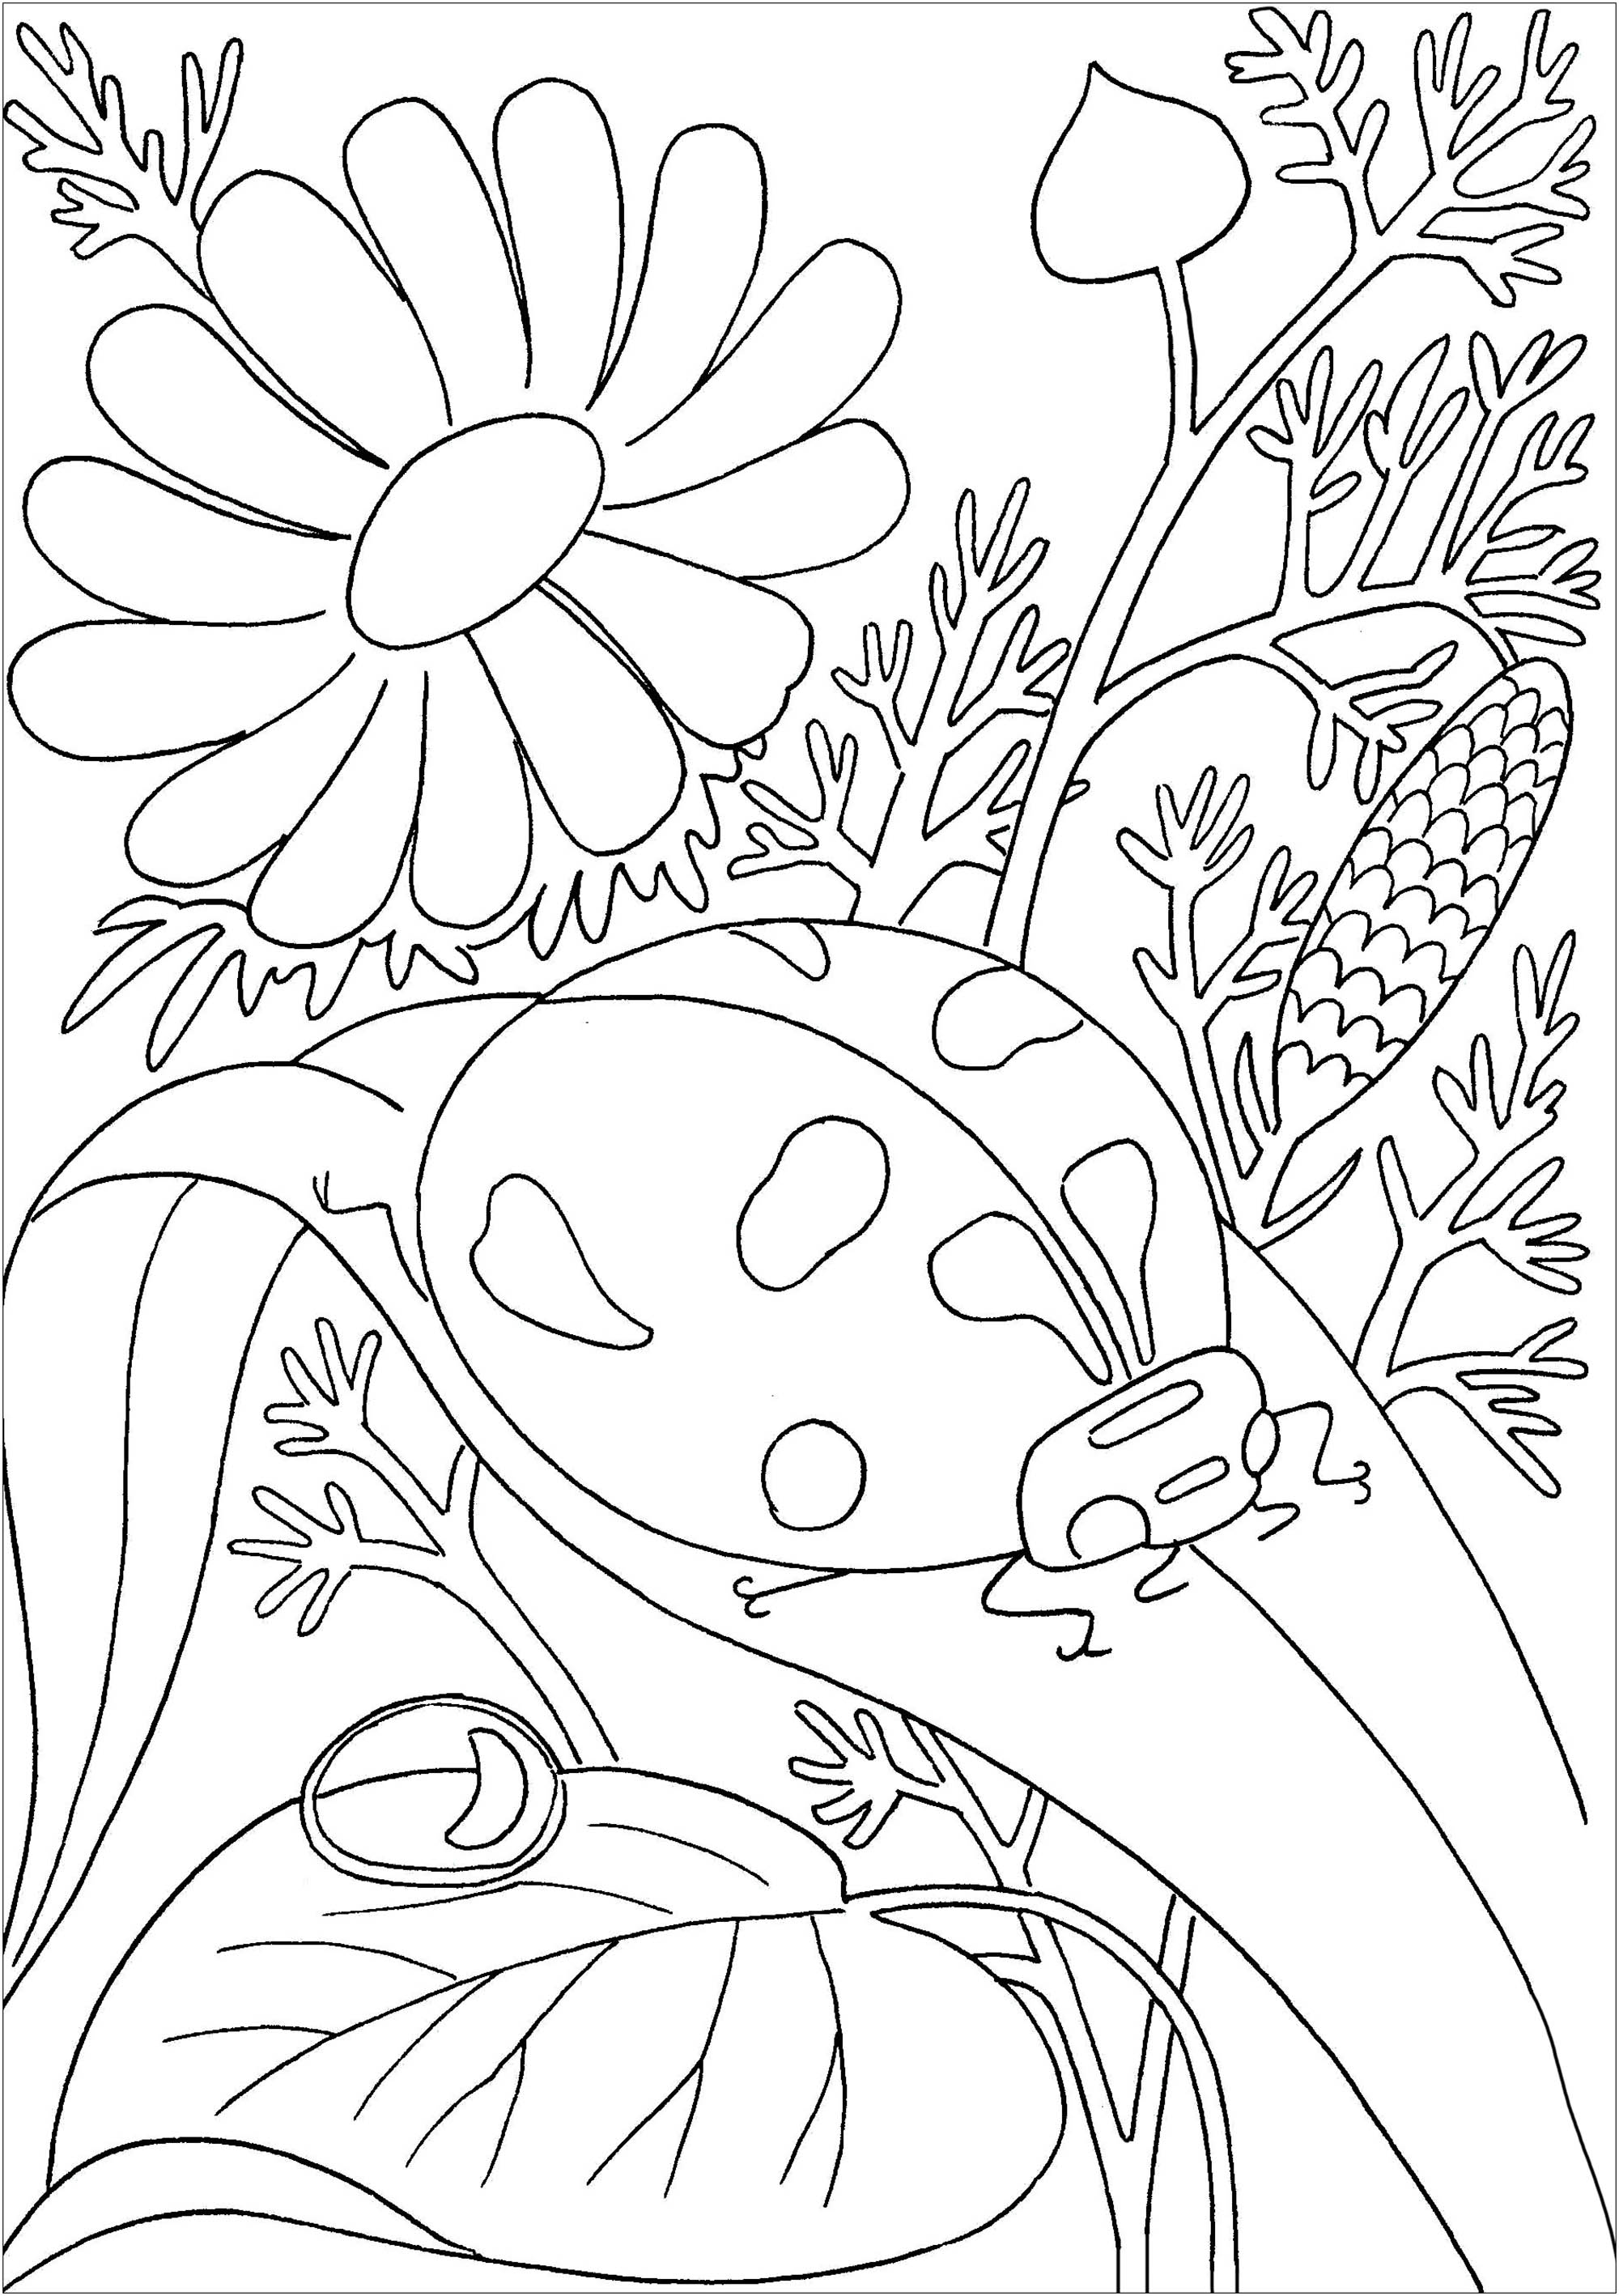 Ladybug on a leave - Butterflies & insects Adult Coloring Pages